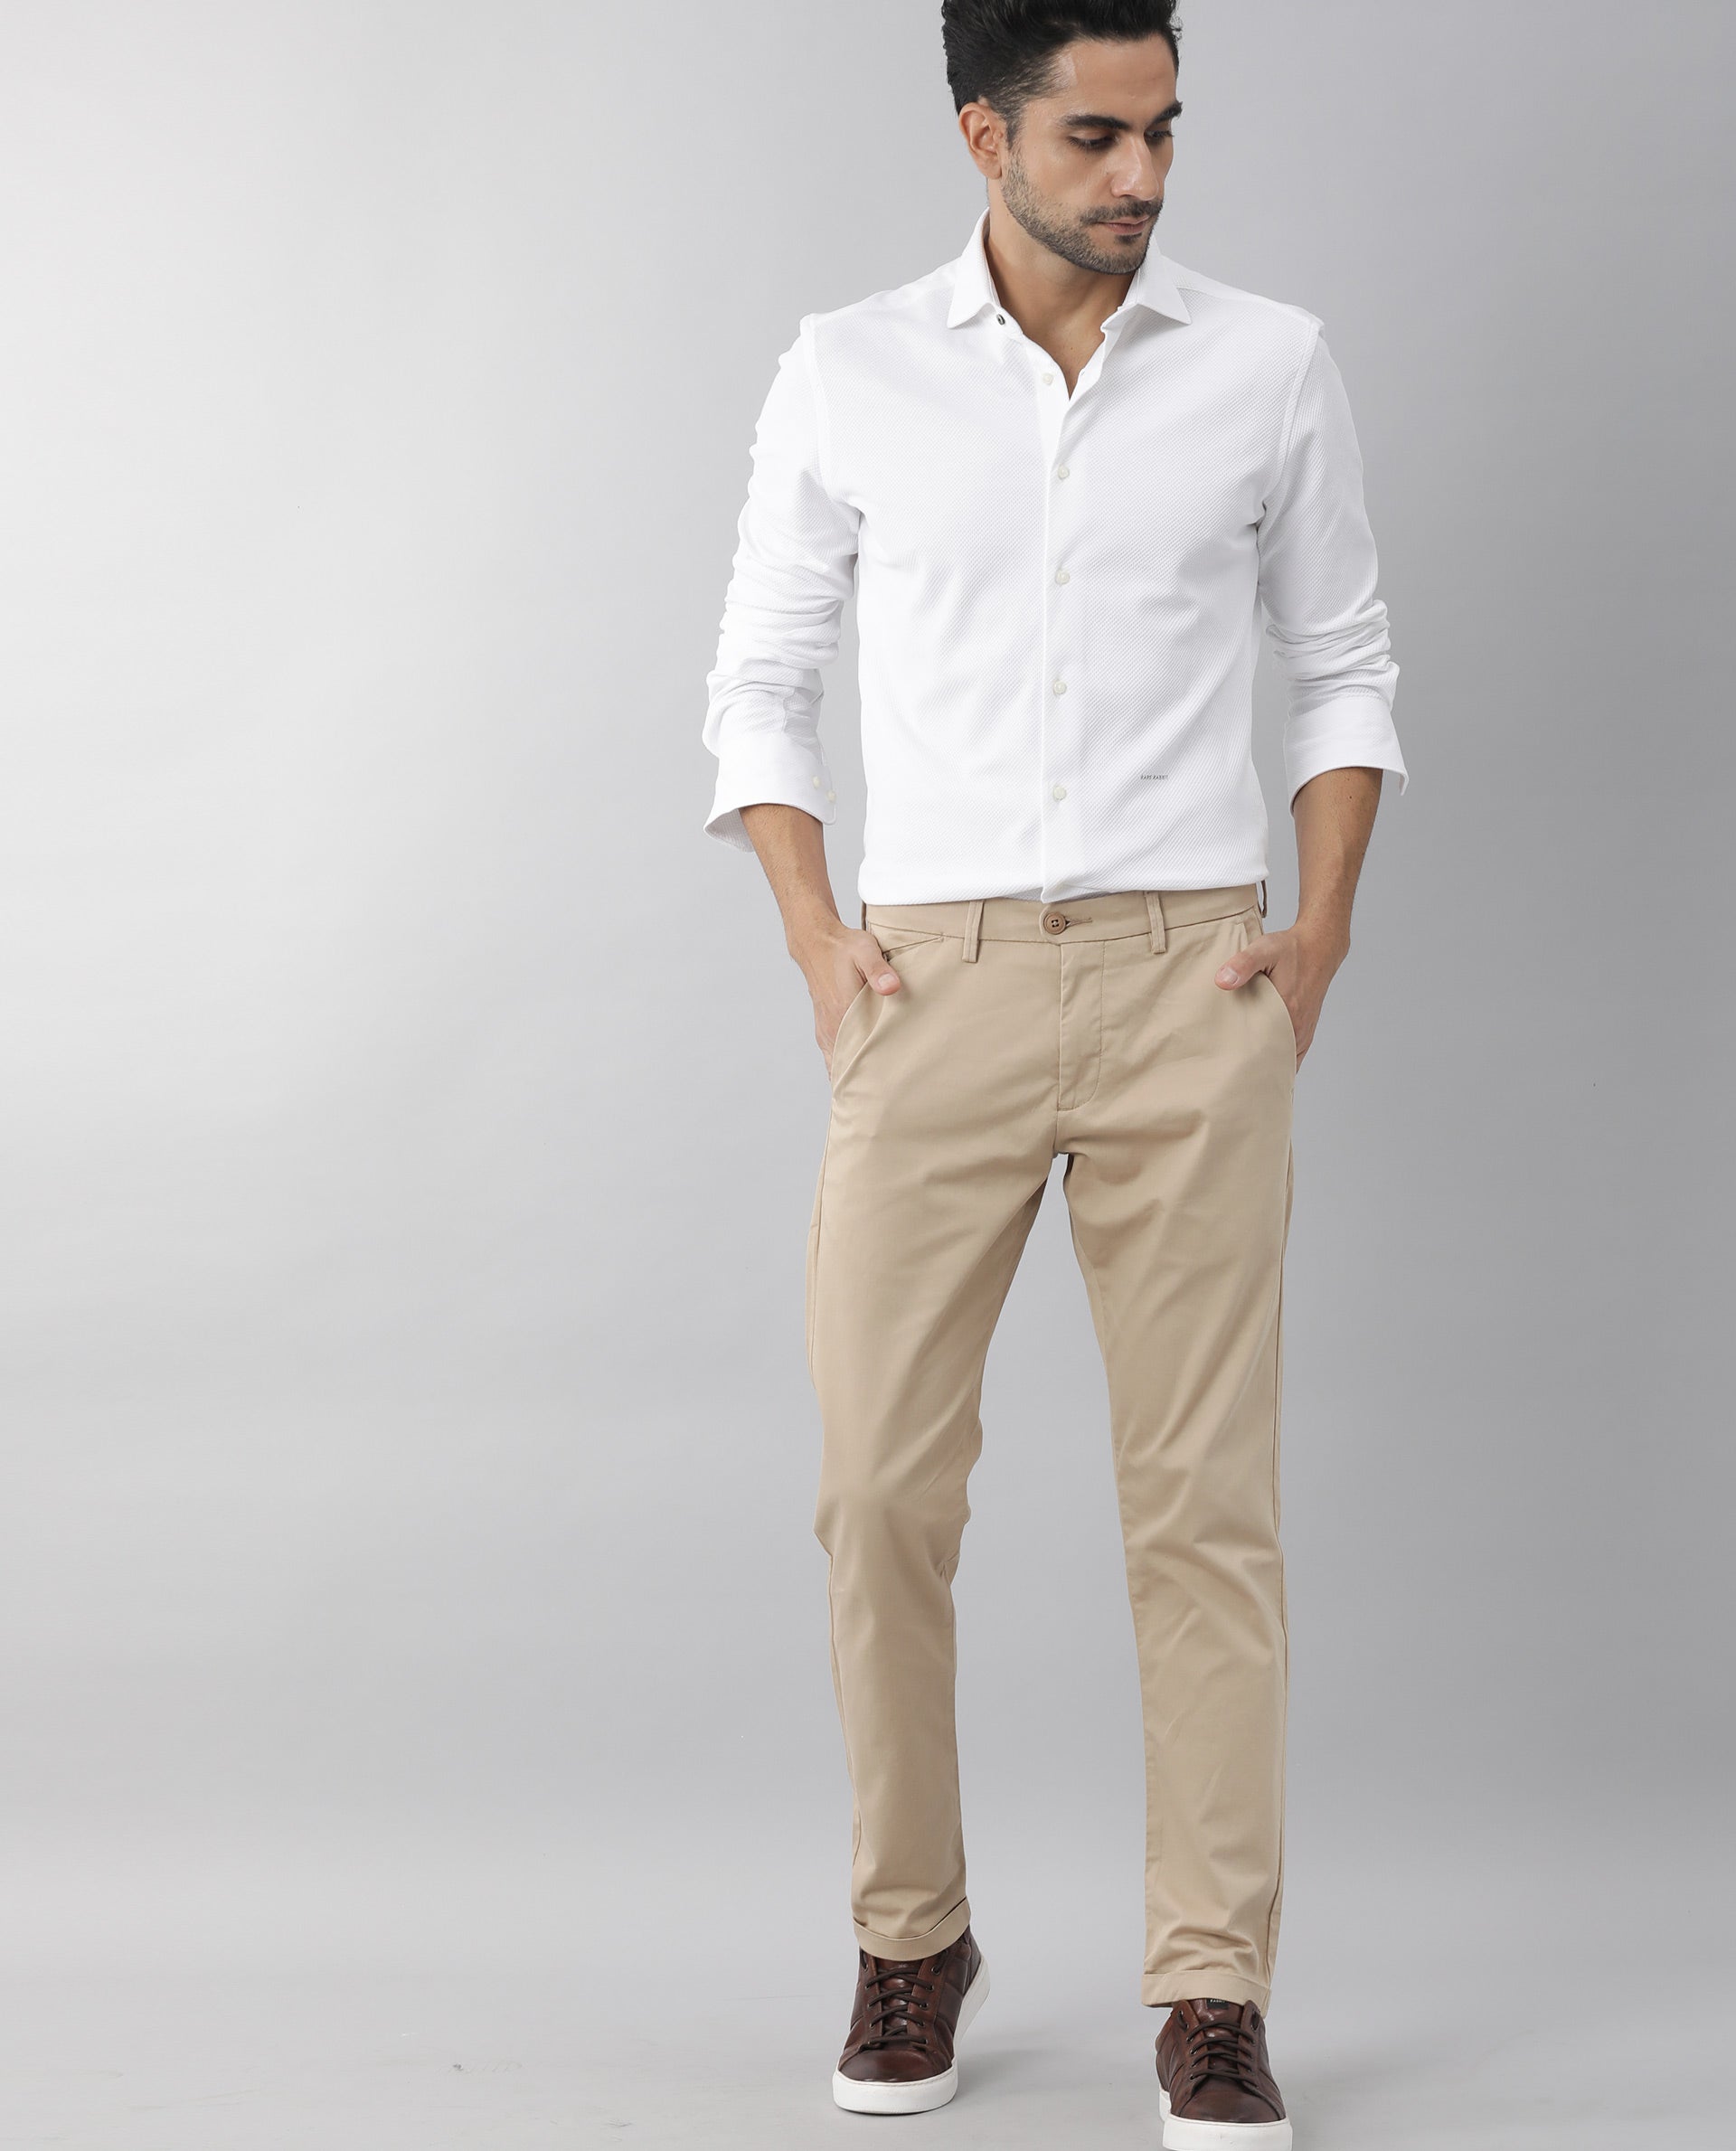 Timeless Classics White Shirt Matching Pant Combination for a Sleek Look